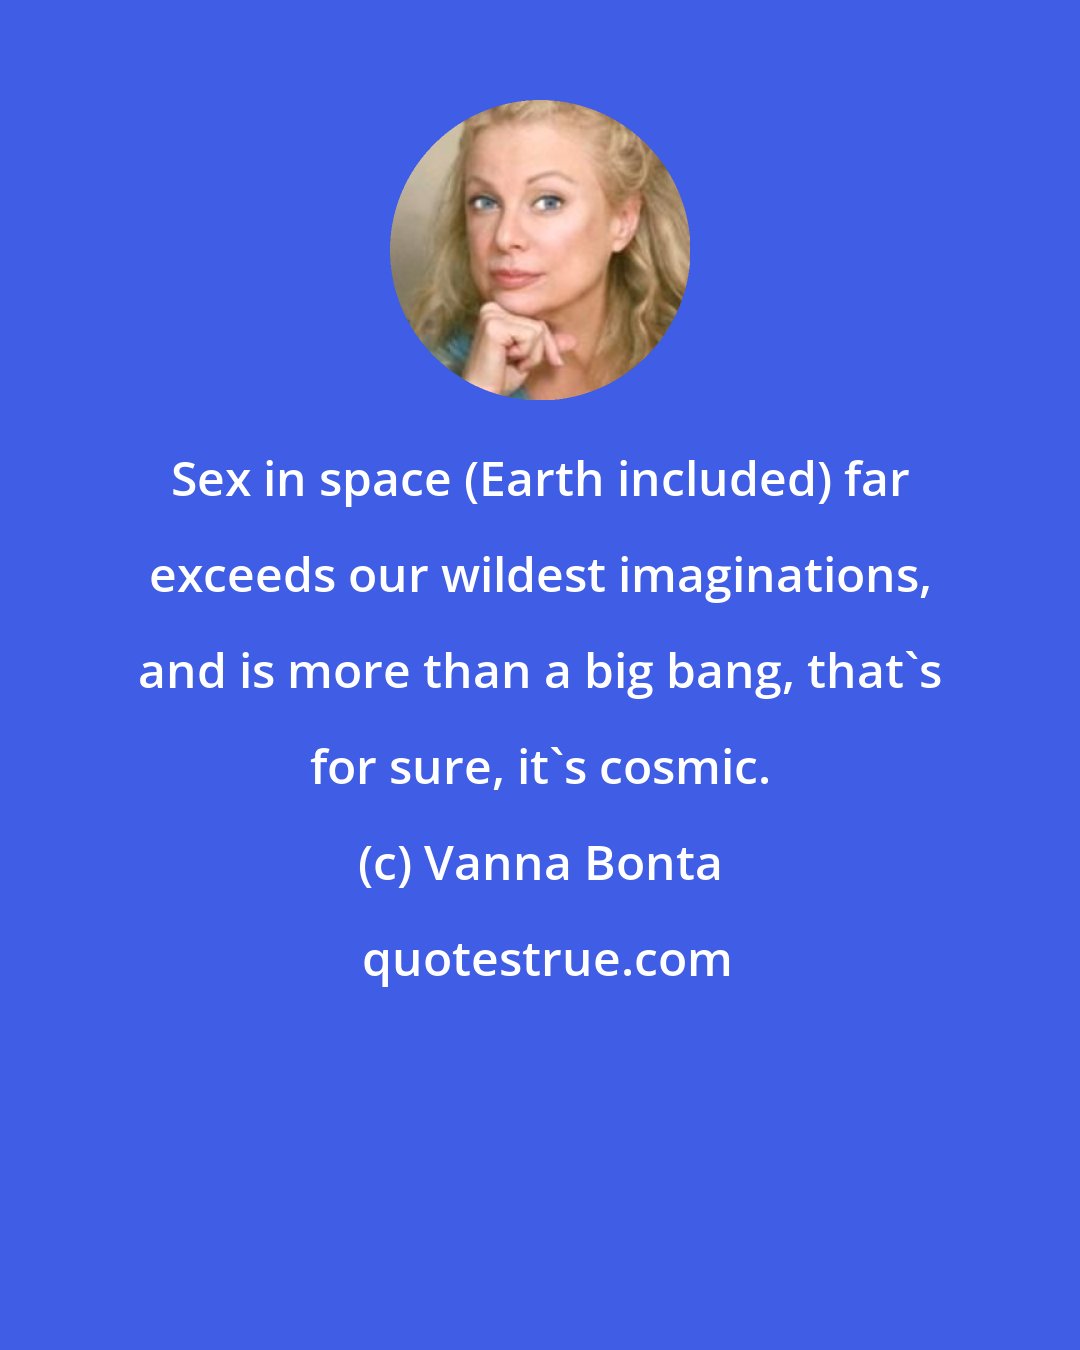 Vanna Bonta: Sex in space (Earth included) far exceeds our wildest imaginations, and is more than a big bang, that's for sure, it's cosmic.